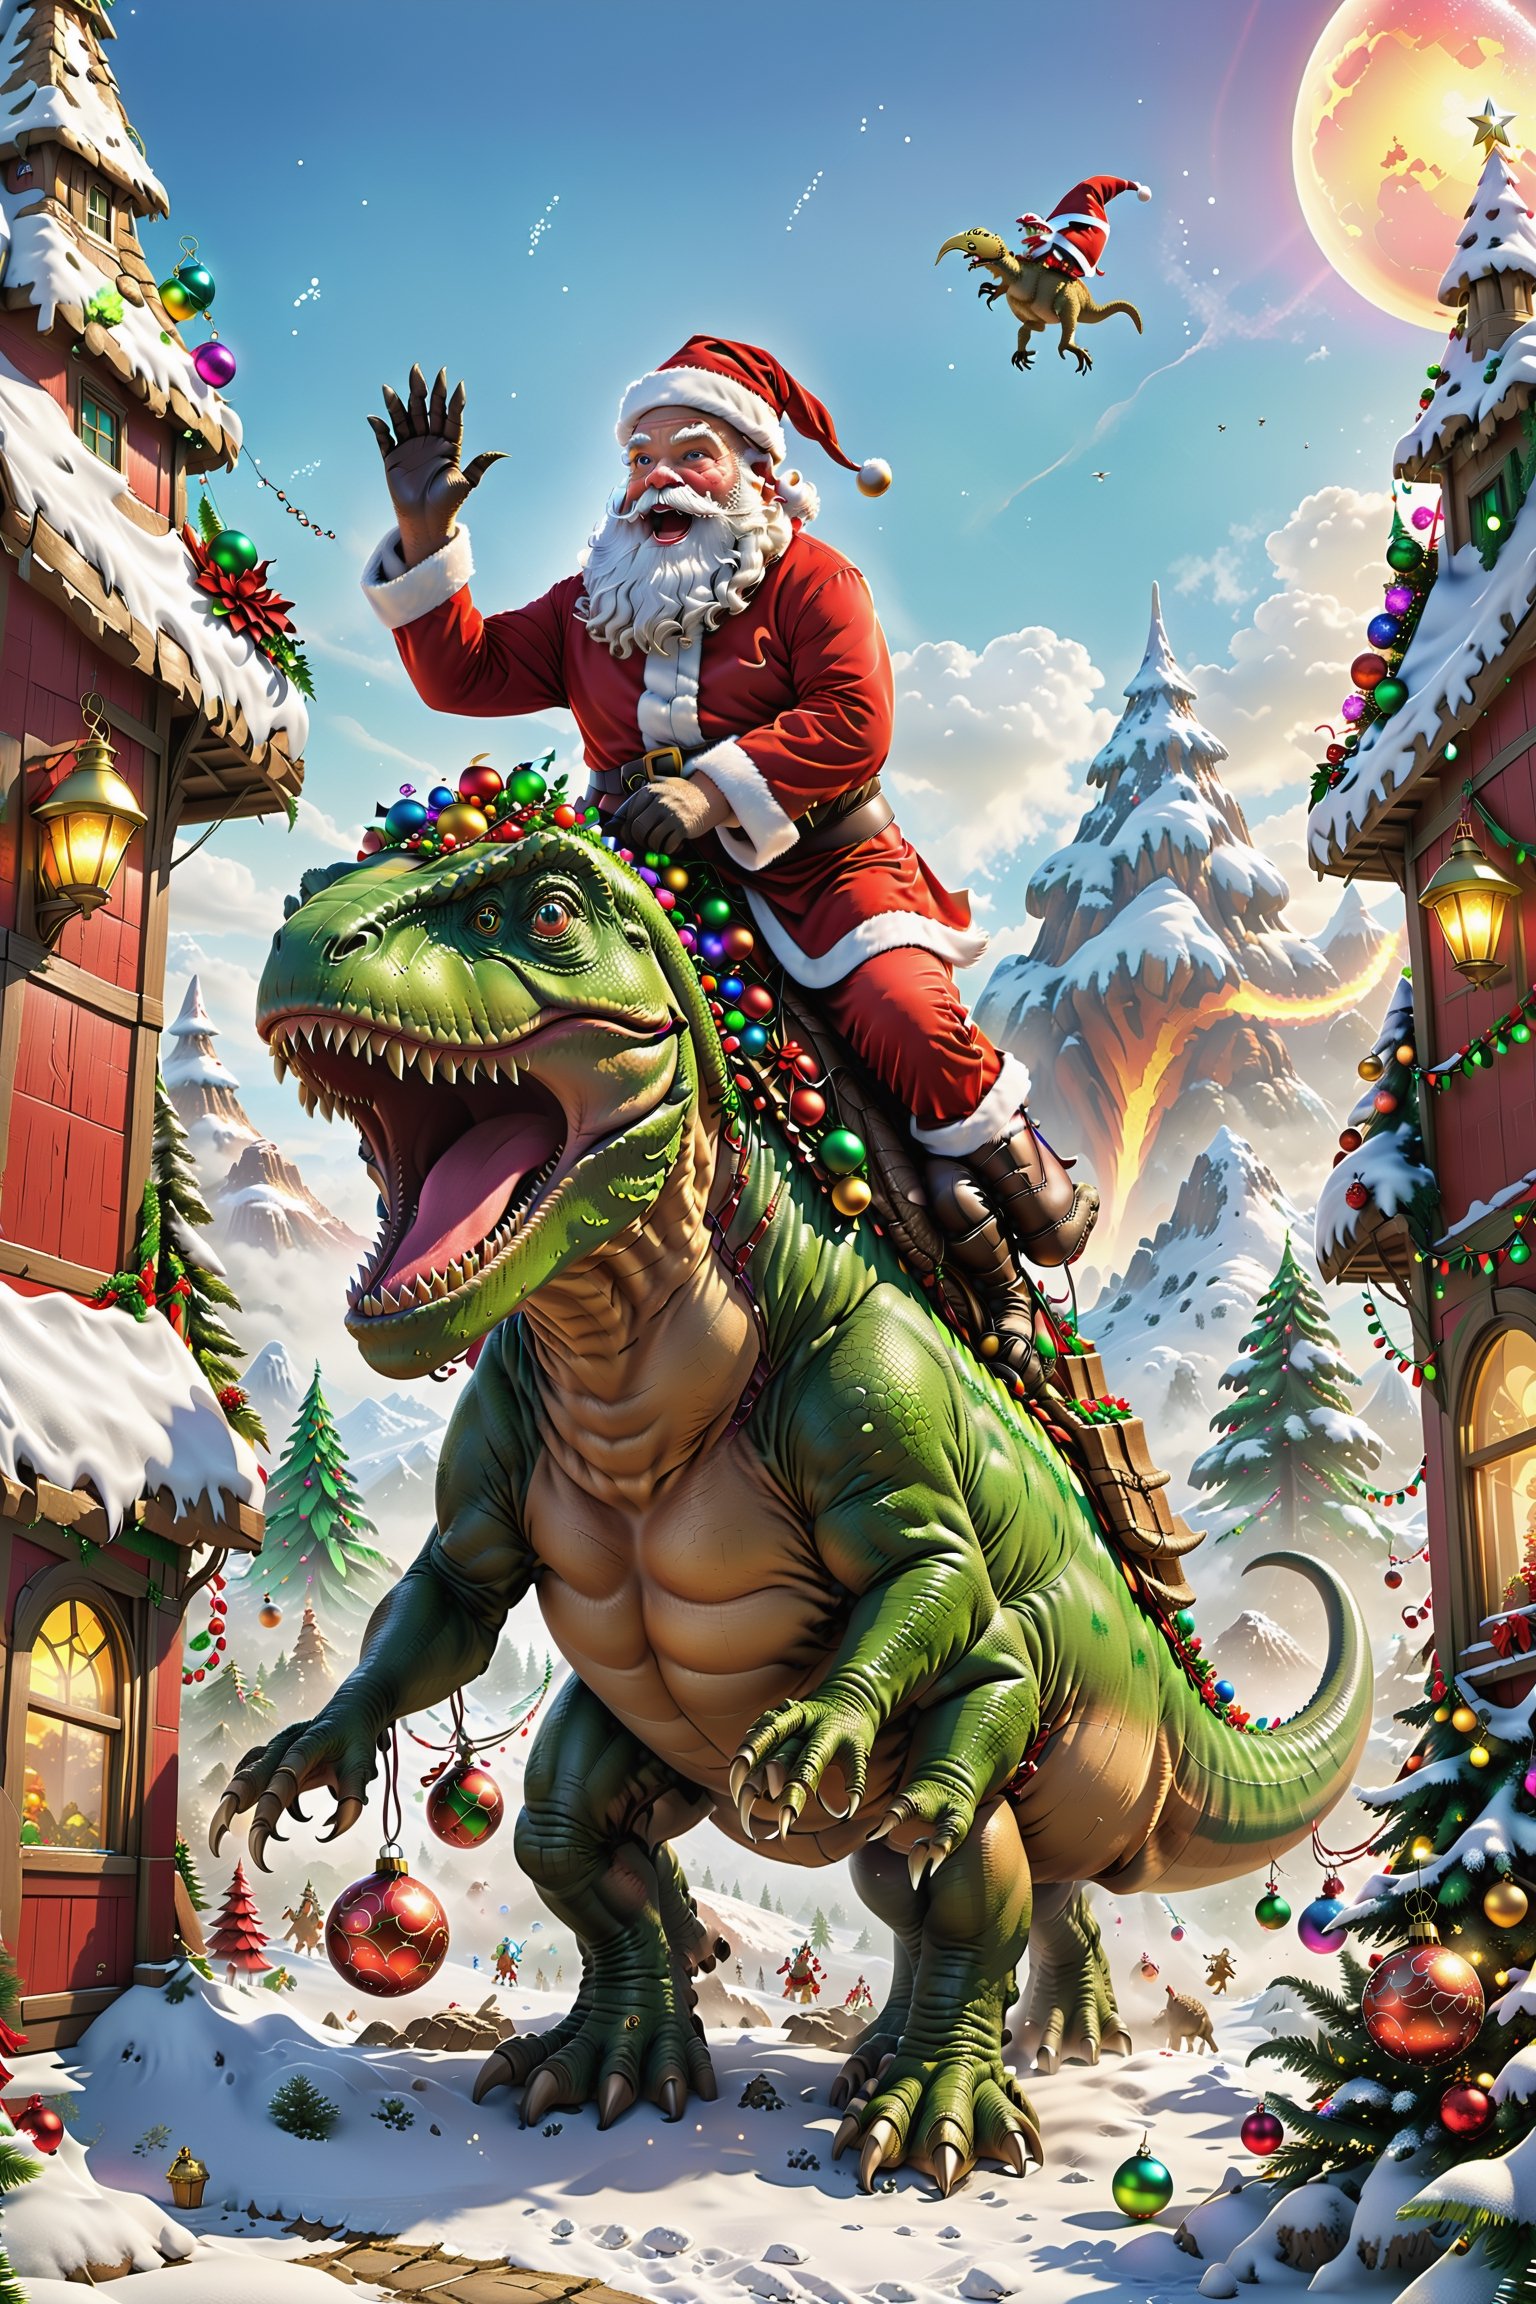 {(((Santa Claus)))} rides on the back of a Tyrannosaurus Rex in this amazing scene that combines traditional Christmas imagery with the Jurassic era to create a fantastical image.

The T. rex is tall and powerful, adorned with colorful Christmas lights and a string of Christmas balls hanging from its head. The T. rex may also have some Christmas hangings on his body, such as red ribbons or bells, adding a festive touch to this T. rex Christmas messenger.

Santa Claus is wearing a special Christmas vest and waving a Christmas decoration similar to a reindeer whip in his hand. His eyes reveal joy and excitement, as if he is delighting in this fantastical riding experience.

Surrounding him is an ancient and mysterious Jurassic era scene, with tall palm trees, strange vegetation, and dinosaurs running in the distance, building up the scene even more colorful.

The whole picture highlights the adventurous spirit of Santa Claus, freeing him from the busy work of gift preparation and traveling through time with the Tyrannosaurus Rex, bringing a whole new level of creativity and fun to this special Christmas season.